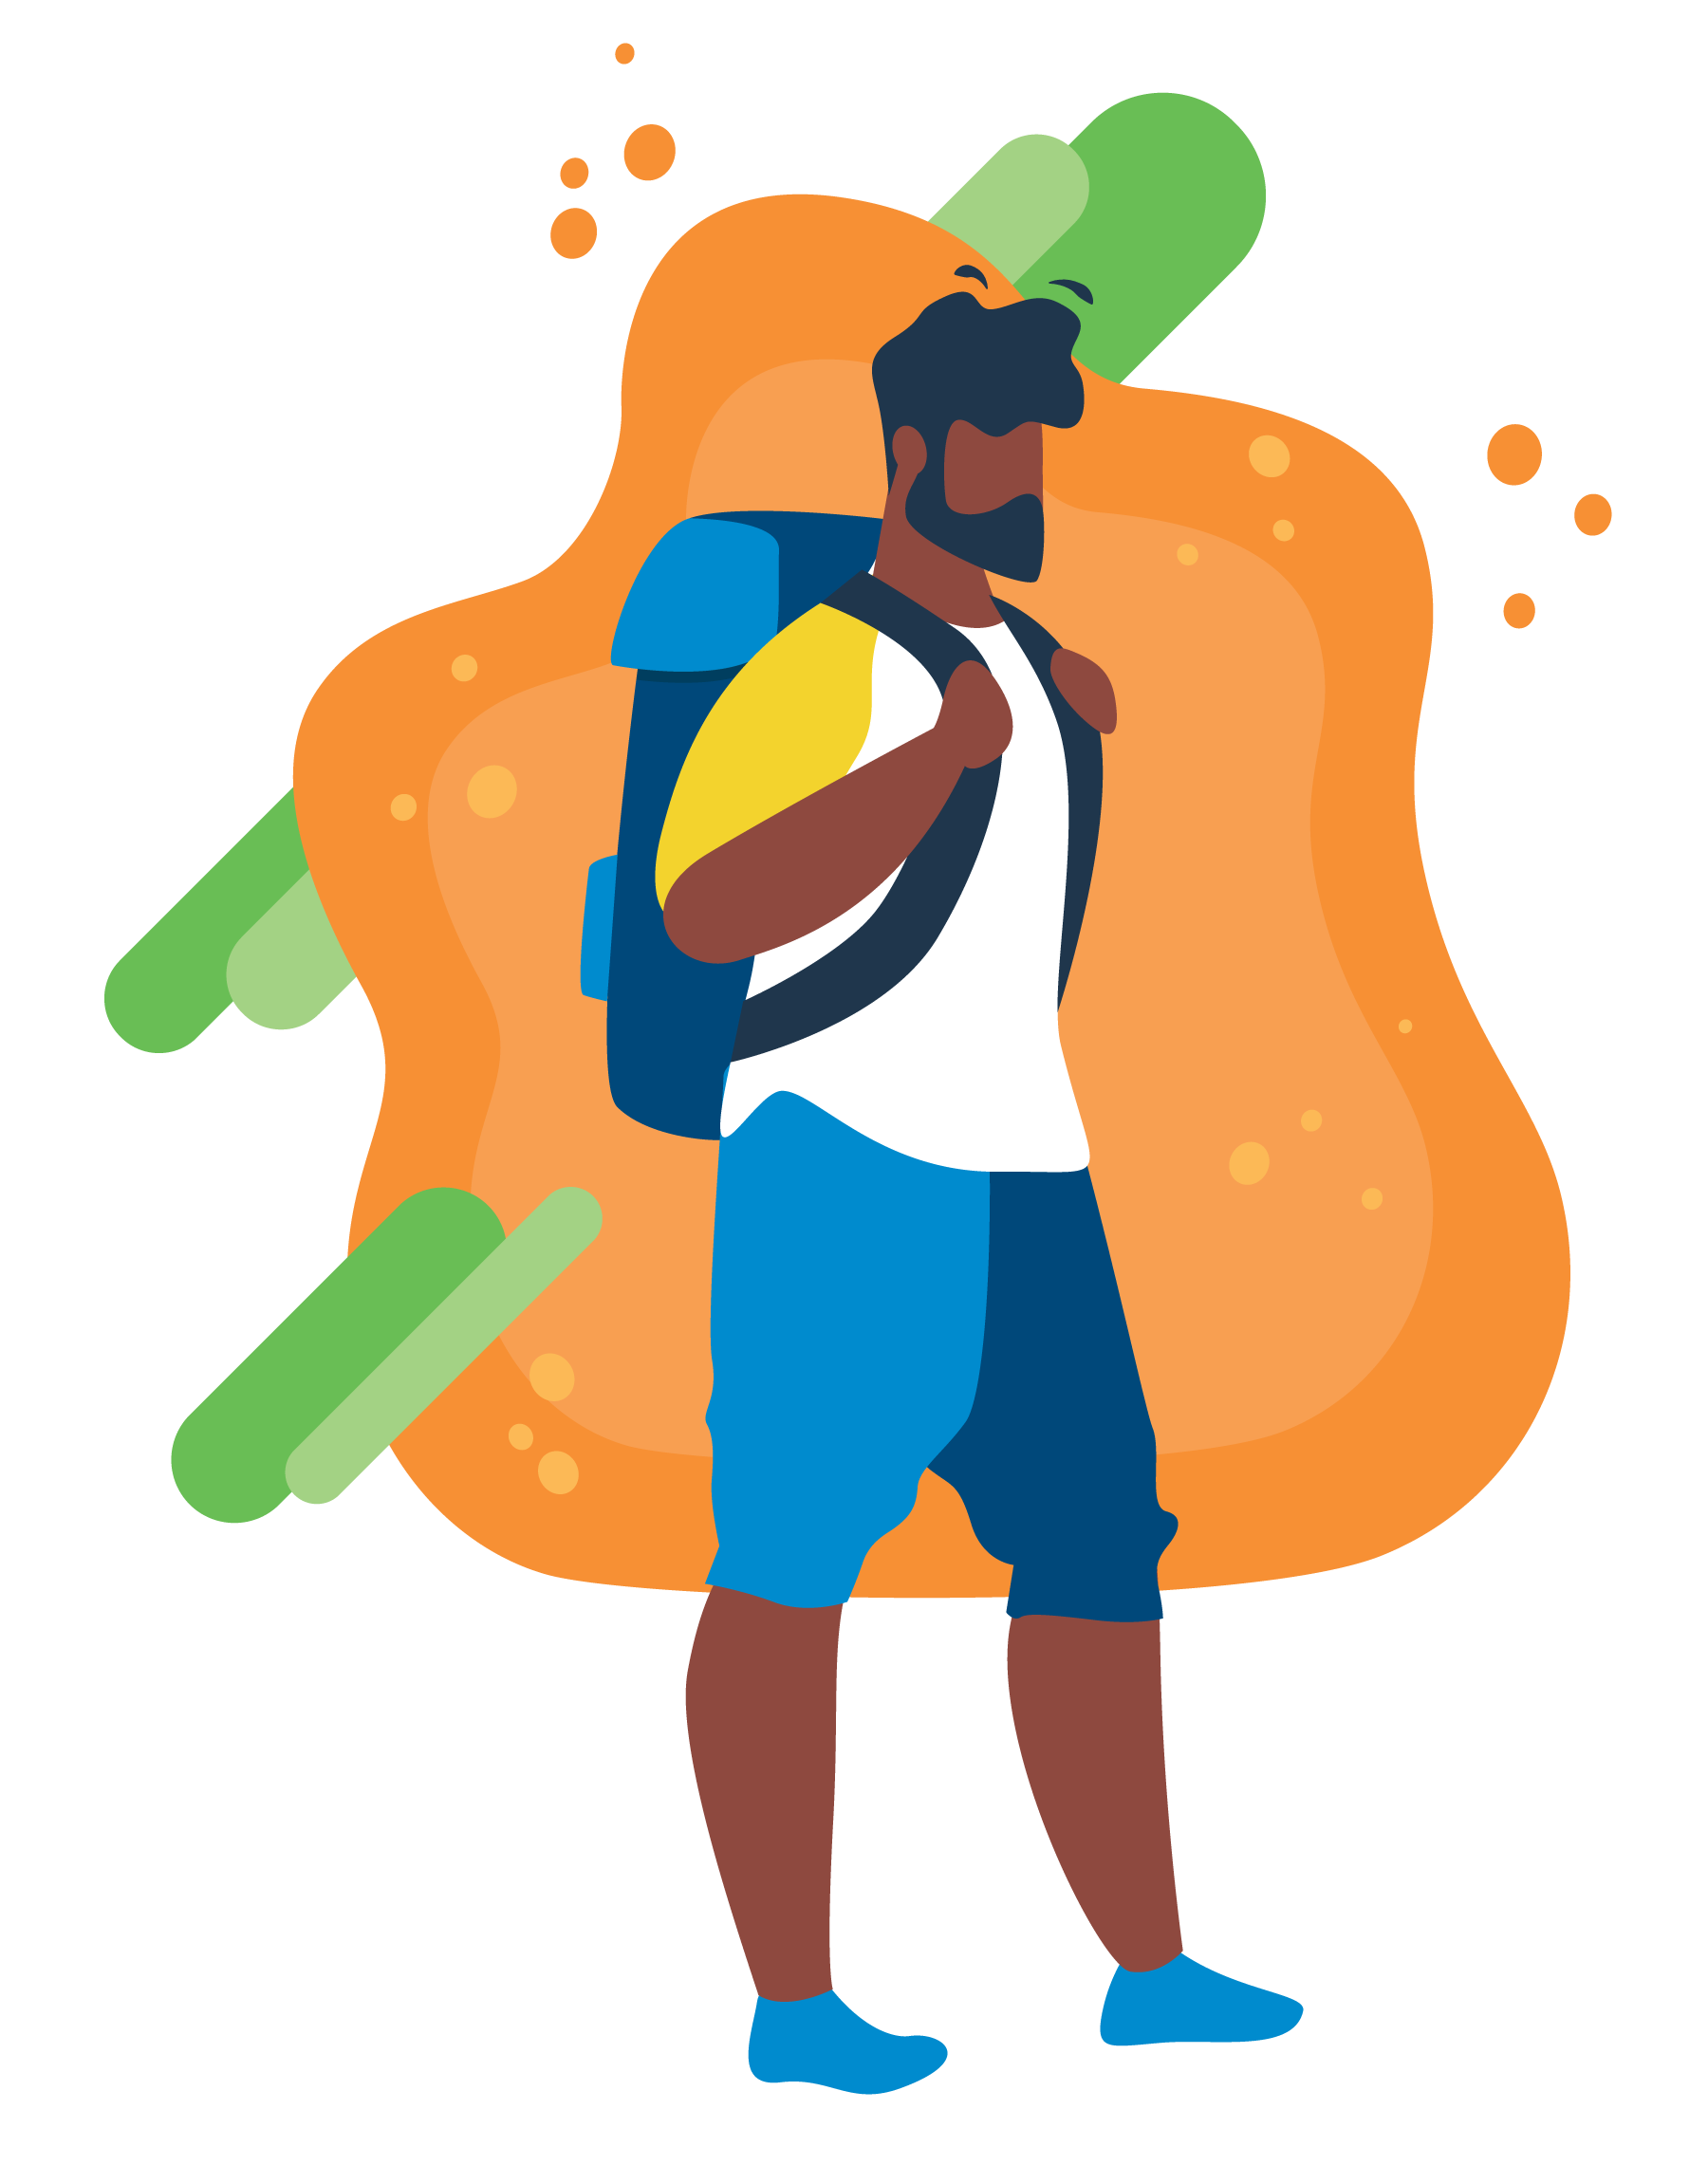 Illustration of Man with backpack ready to Hike